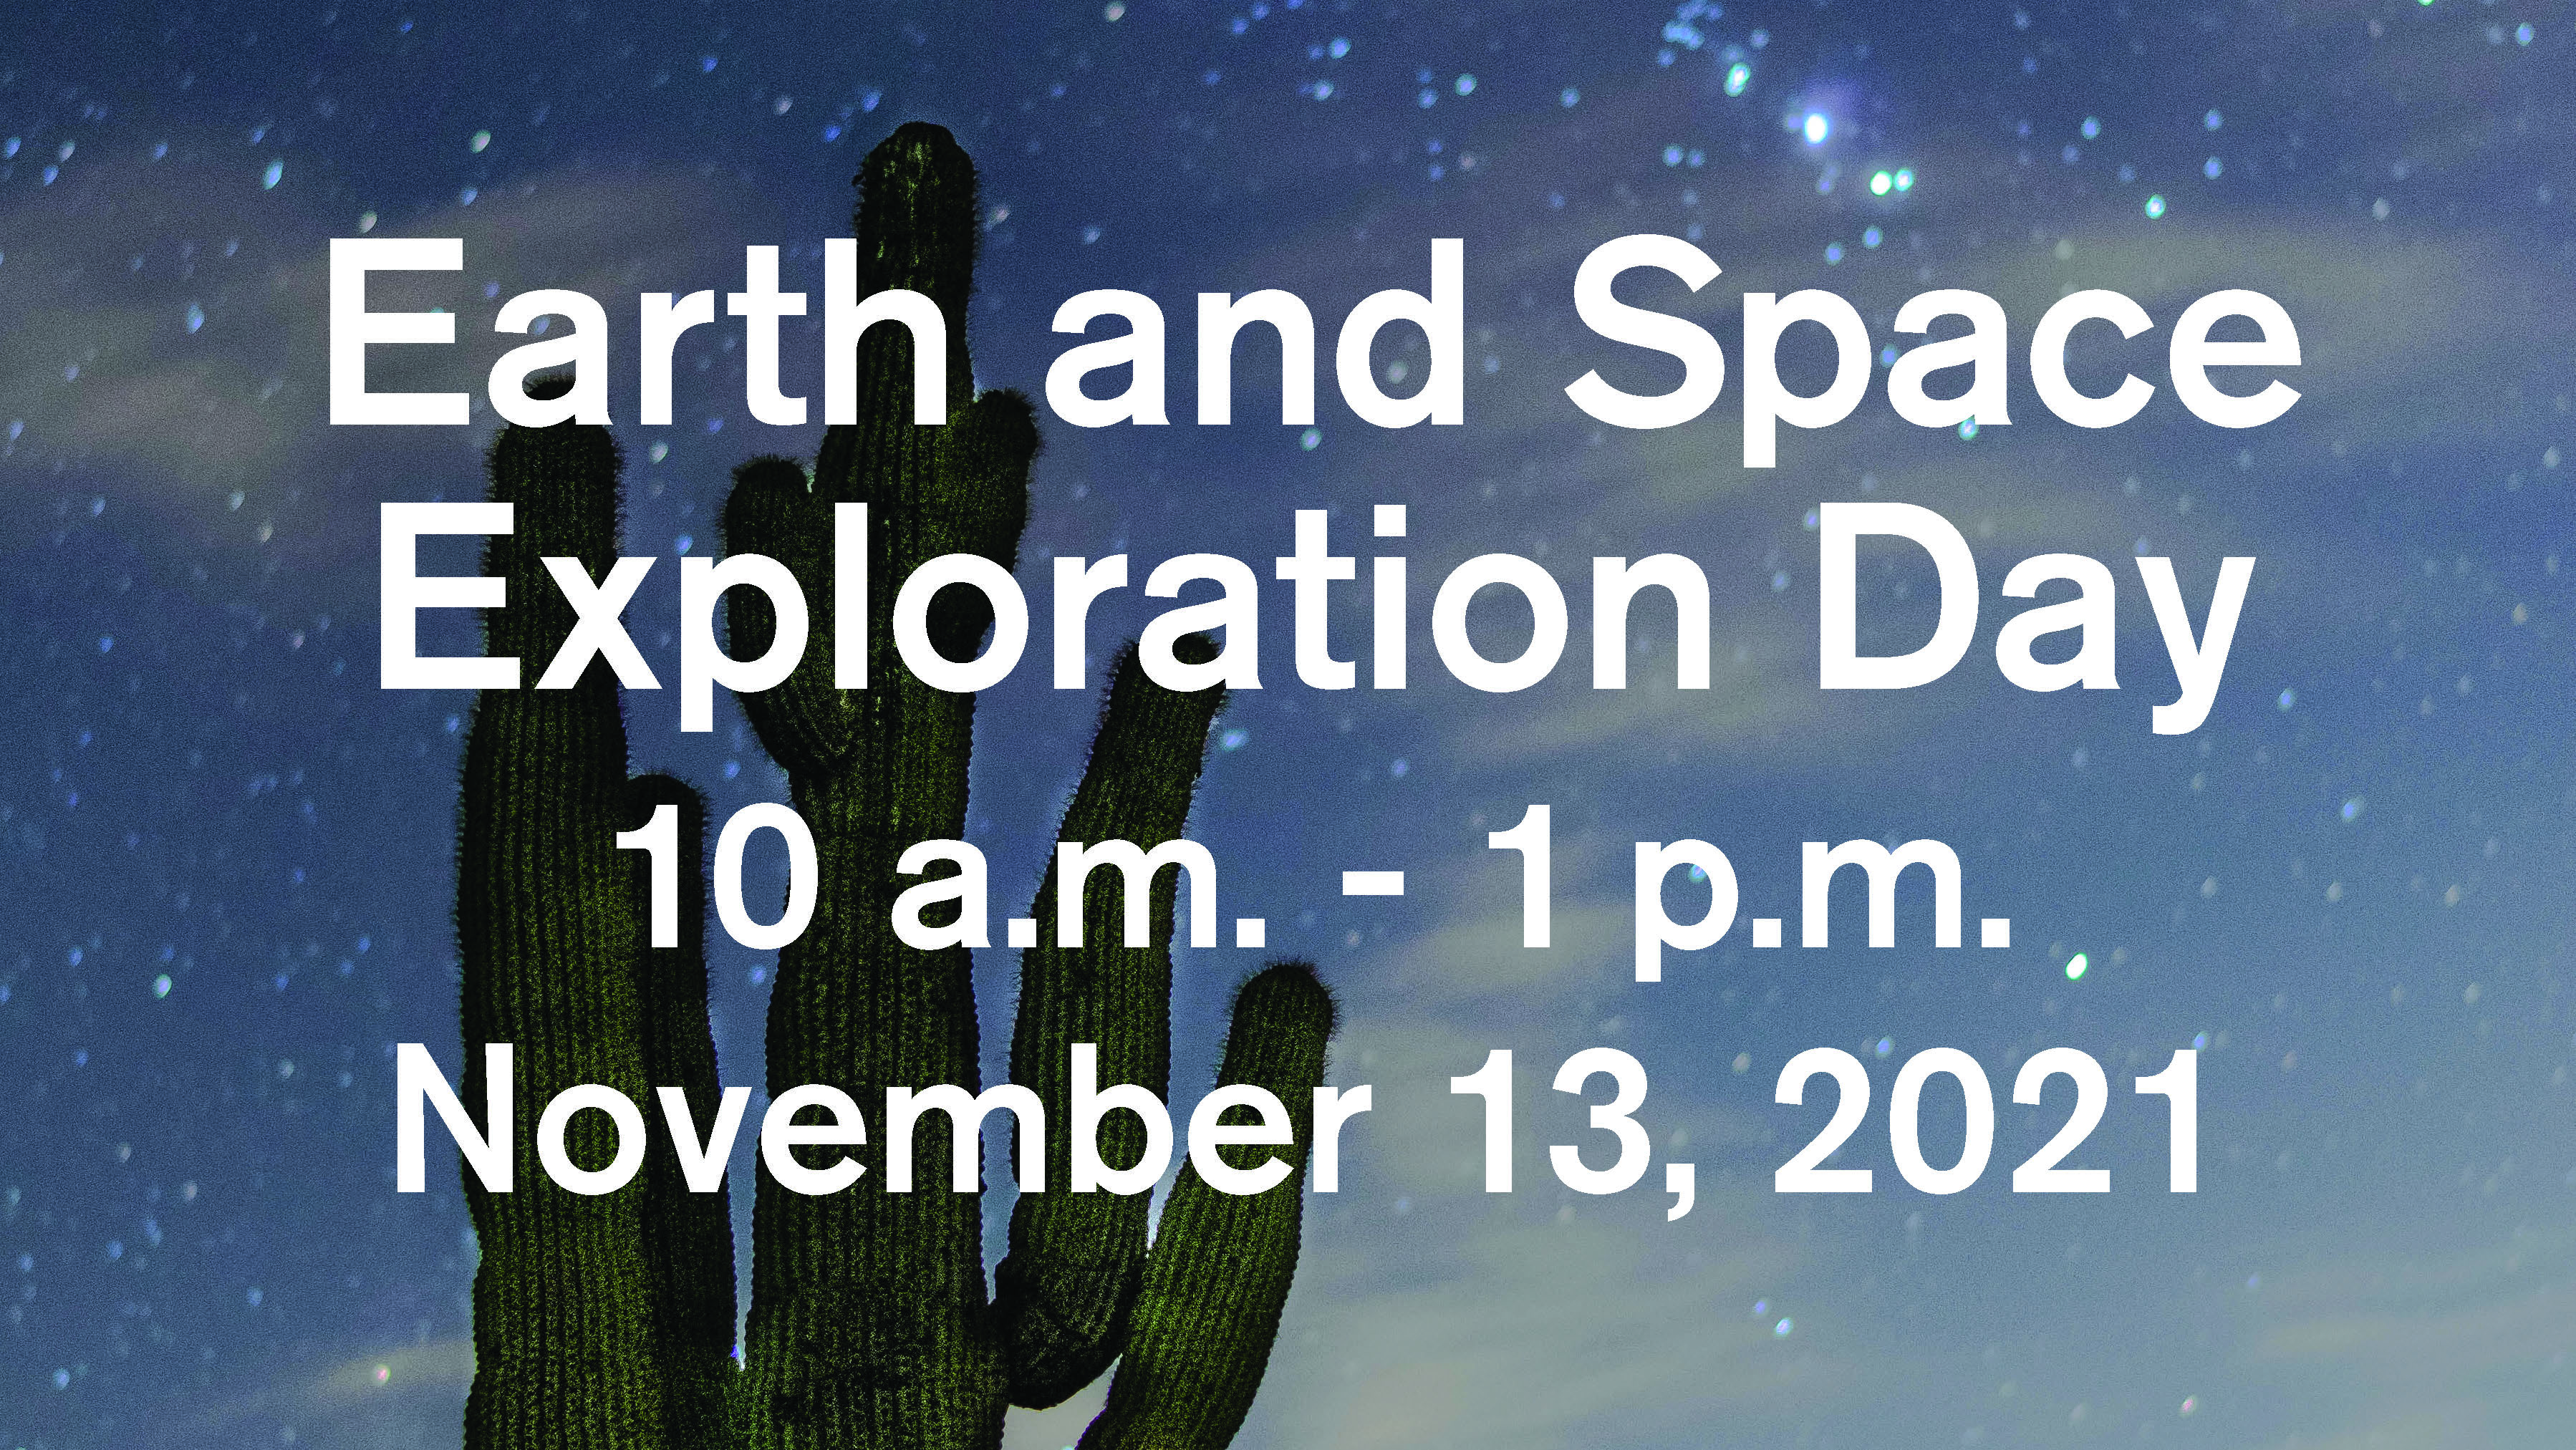 Earth and Space Exploration Day